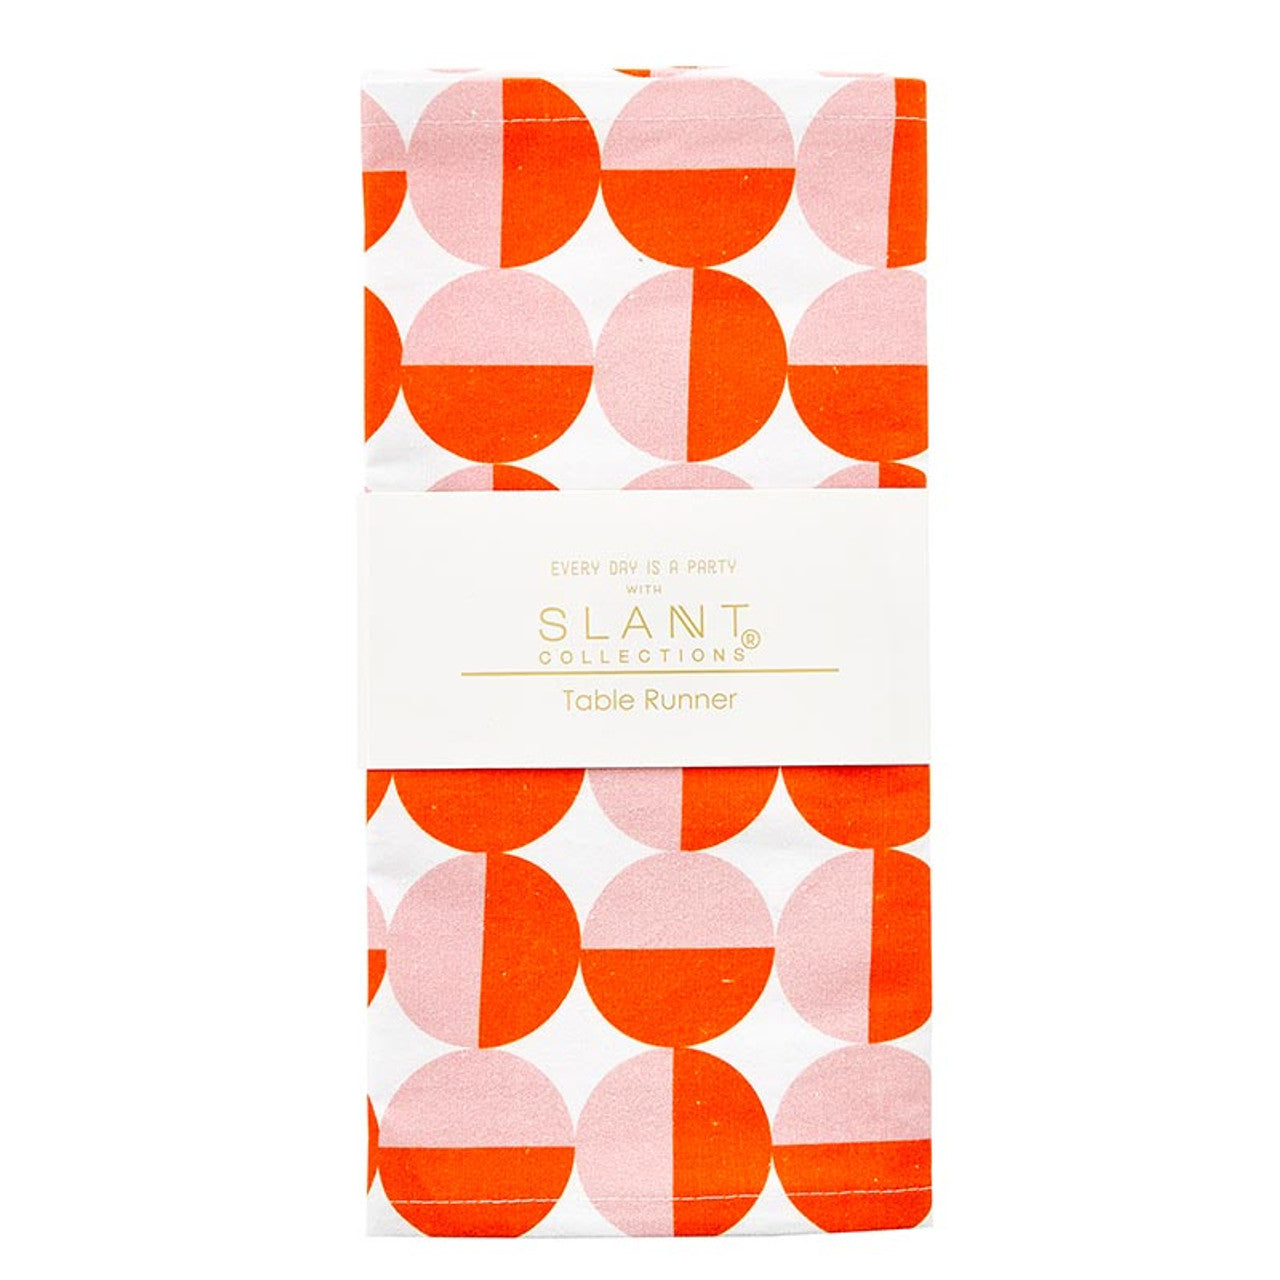 Retro Rounds Fabric Table Runner | Orange and Pink Circles Design | 13" x 70"